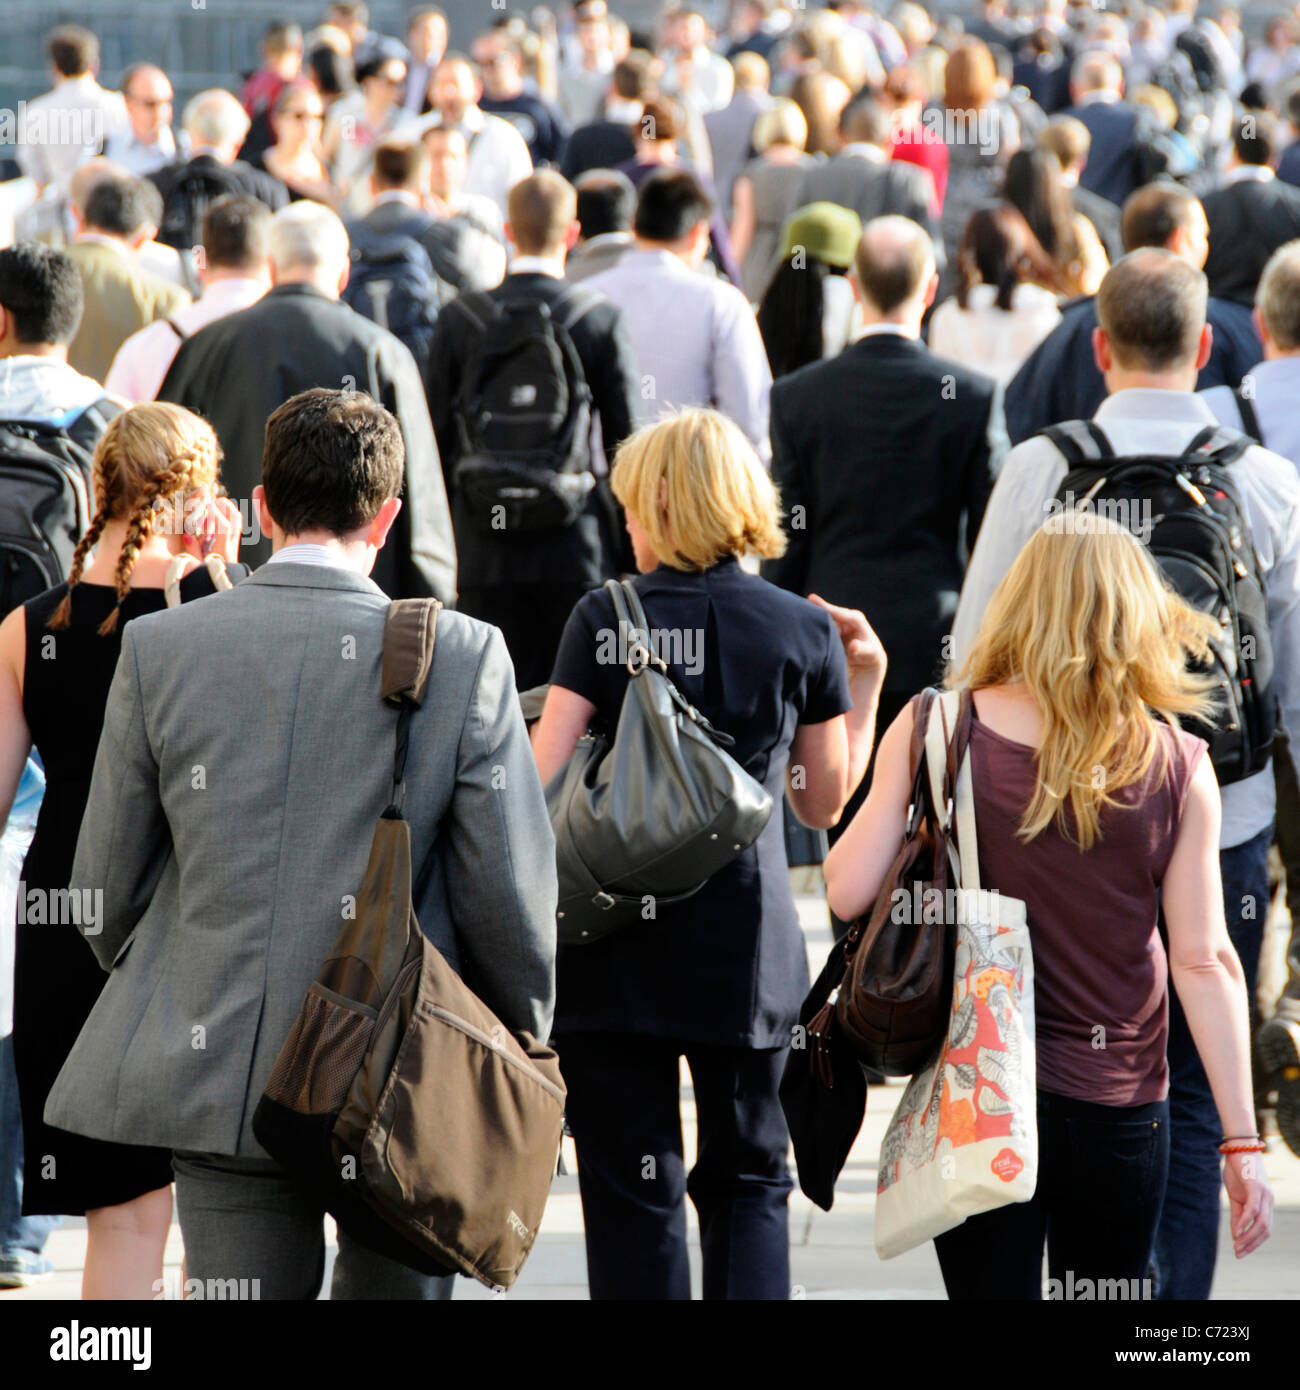 Back view office workers walking on crowded bridge towards London Bridge railway station summertime evening rush hour going home from work England UK Stock Photo